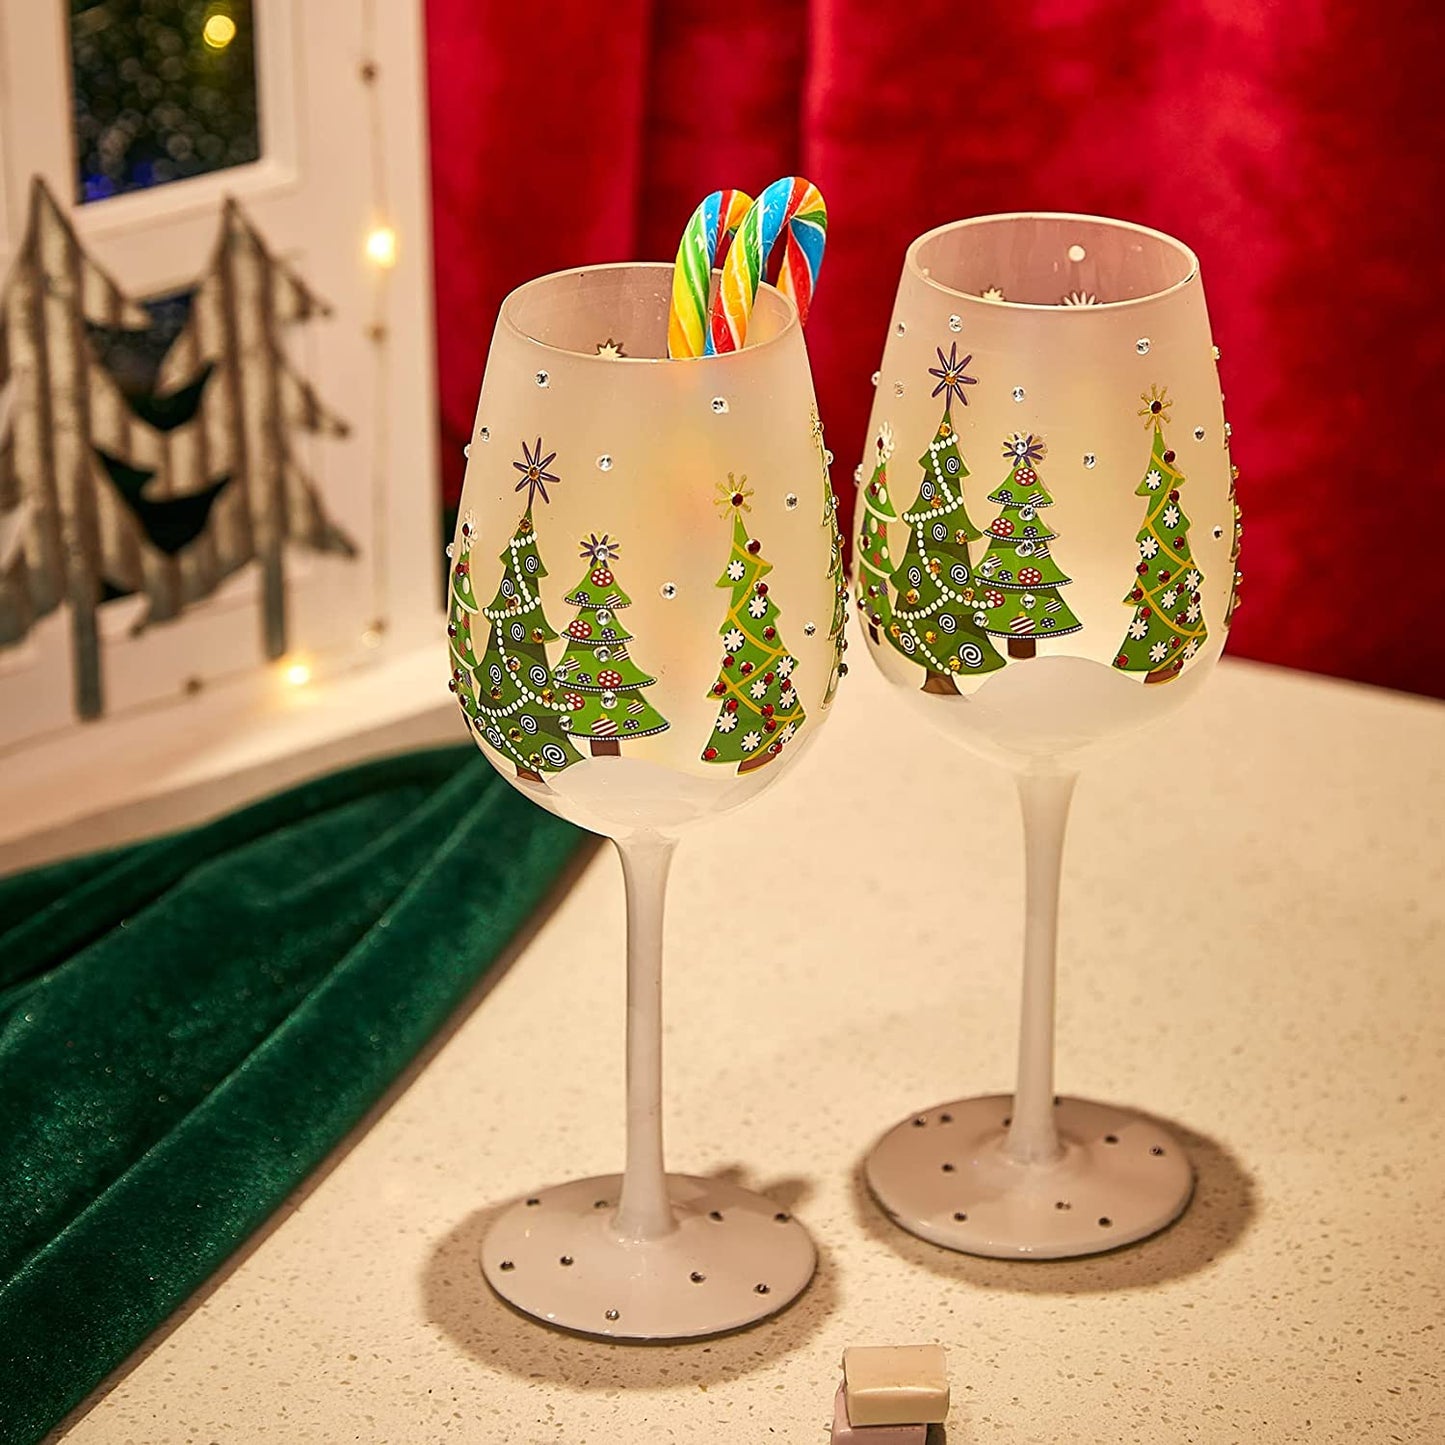 Set of 2 Stemmed Christmas Tree Design Wine Glasses - Hand Painted 14 oz Decorated Christmas Tree Glasses - Perfect for Wine, Champagne, Holiday Parties and Festivities - 8.75" High, 14 oz Capacity-1